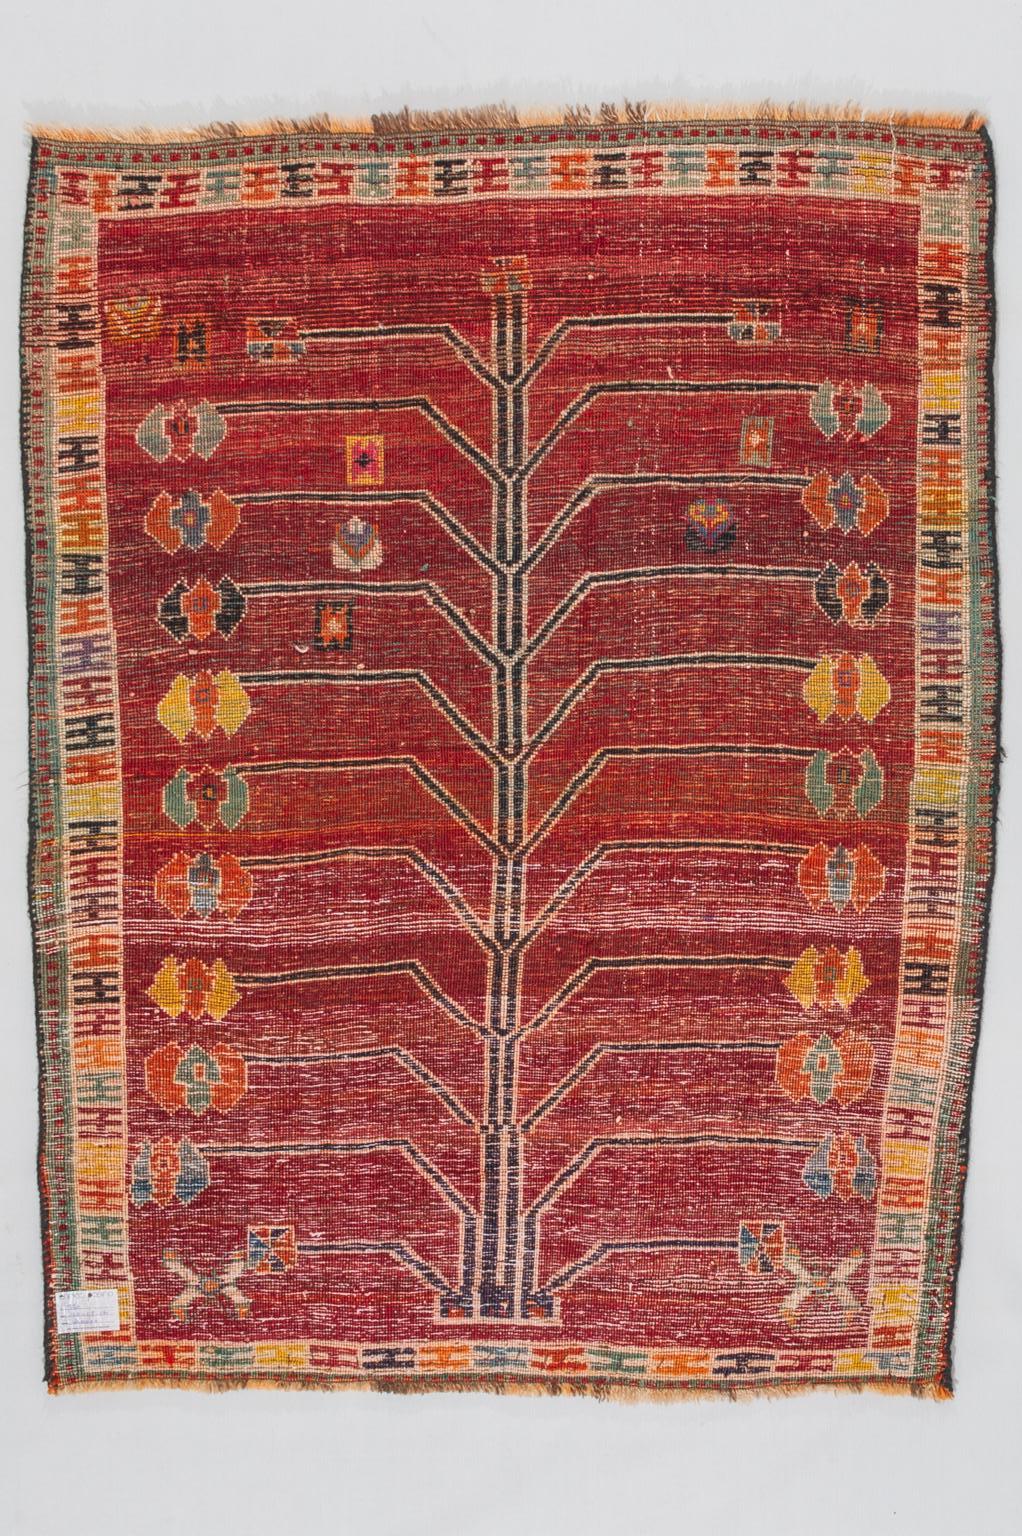 This carpet is a true typical nomadic product from the Kurdish mountains.
A pomegranate tree, a symbol of fertility, occupies the whole field.
It was probably a gift for the newlyweds because the pomegranate is a symbol of fertility.  Very sturdy,